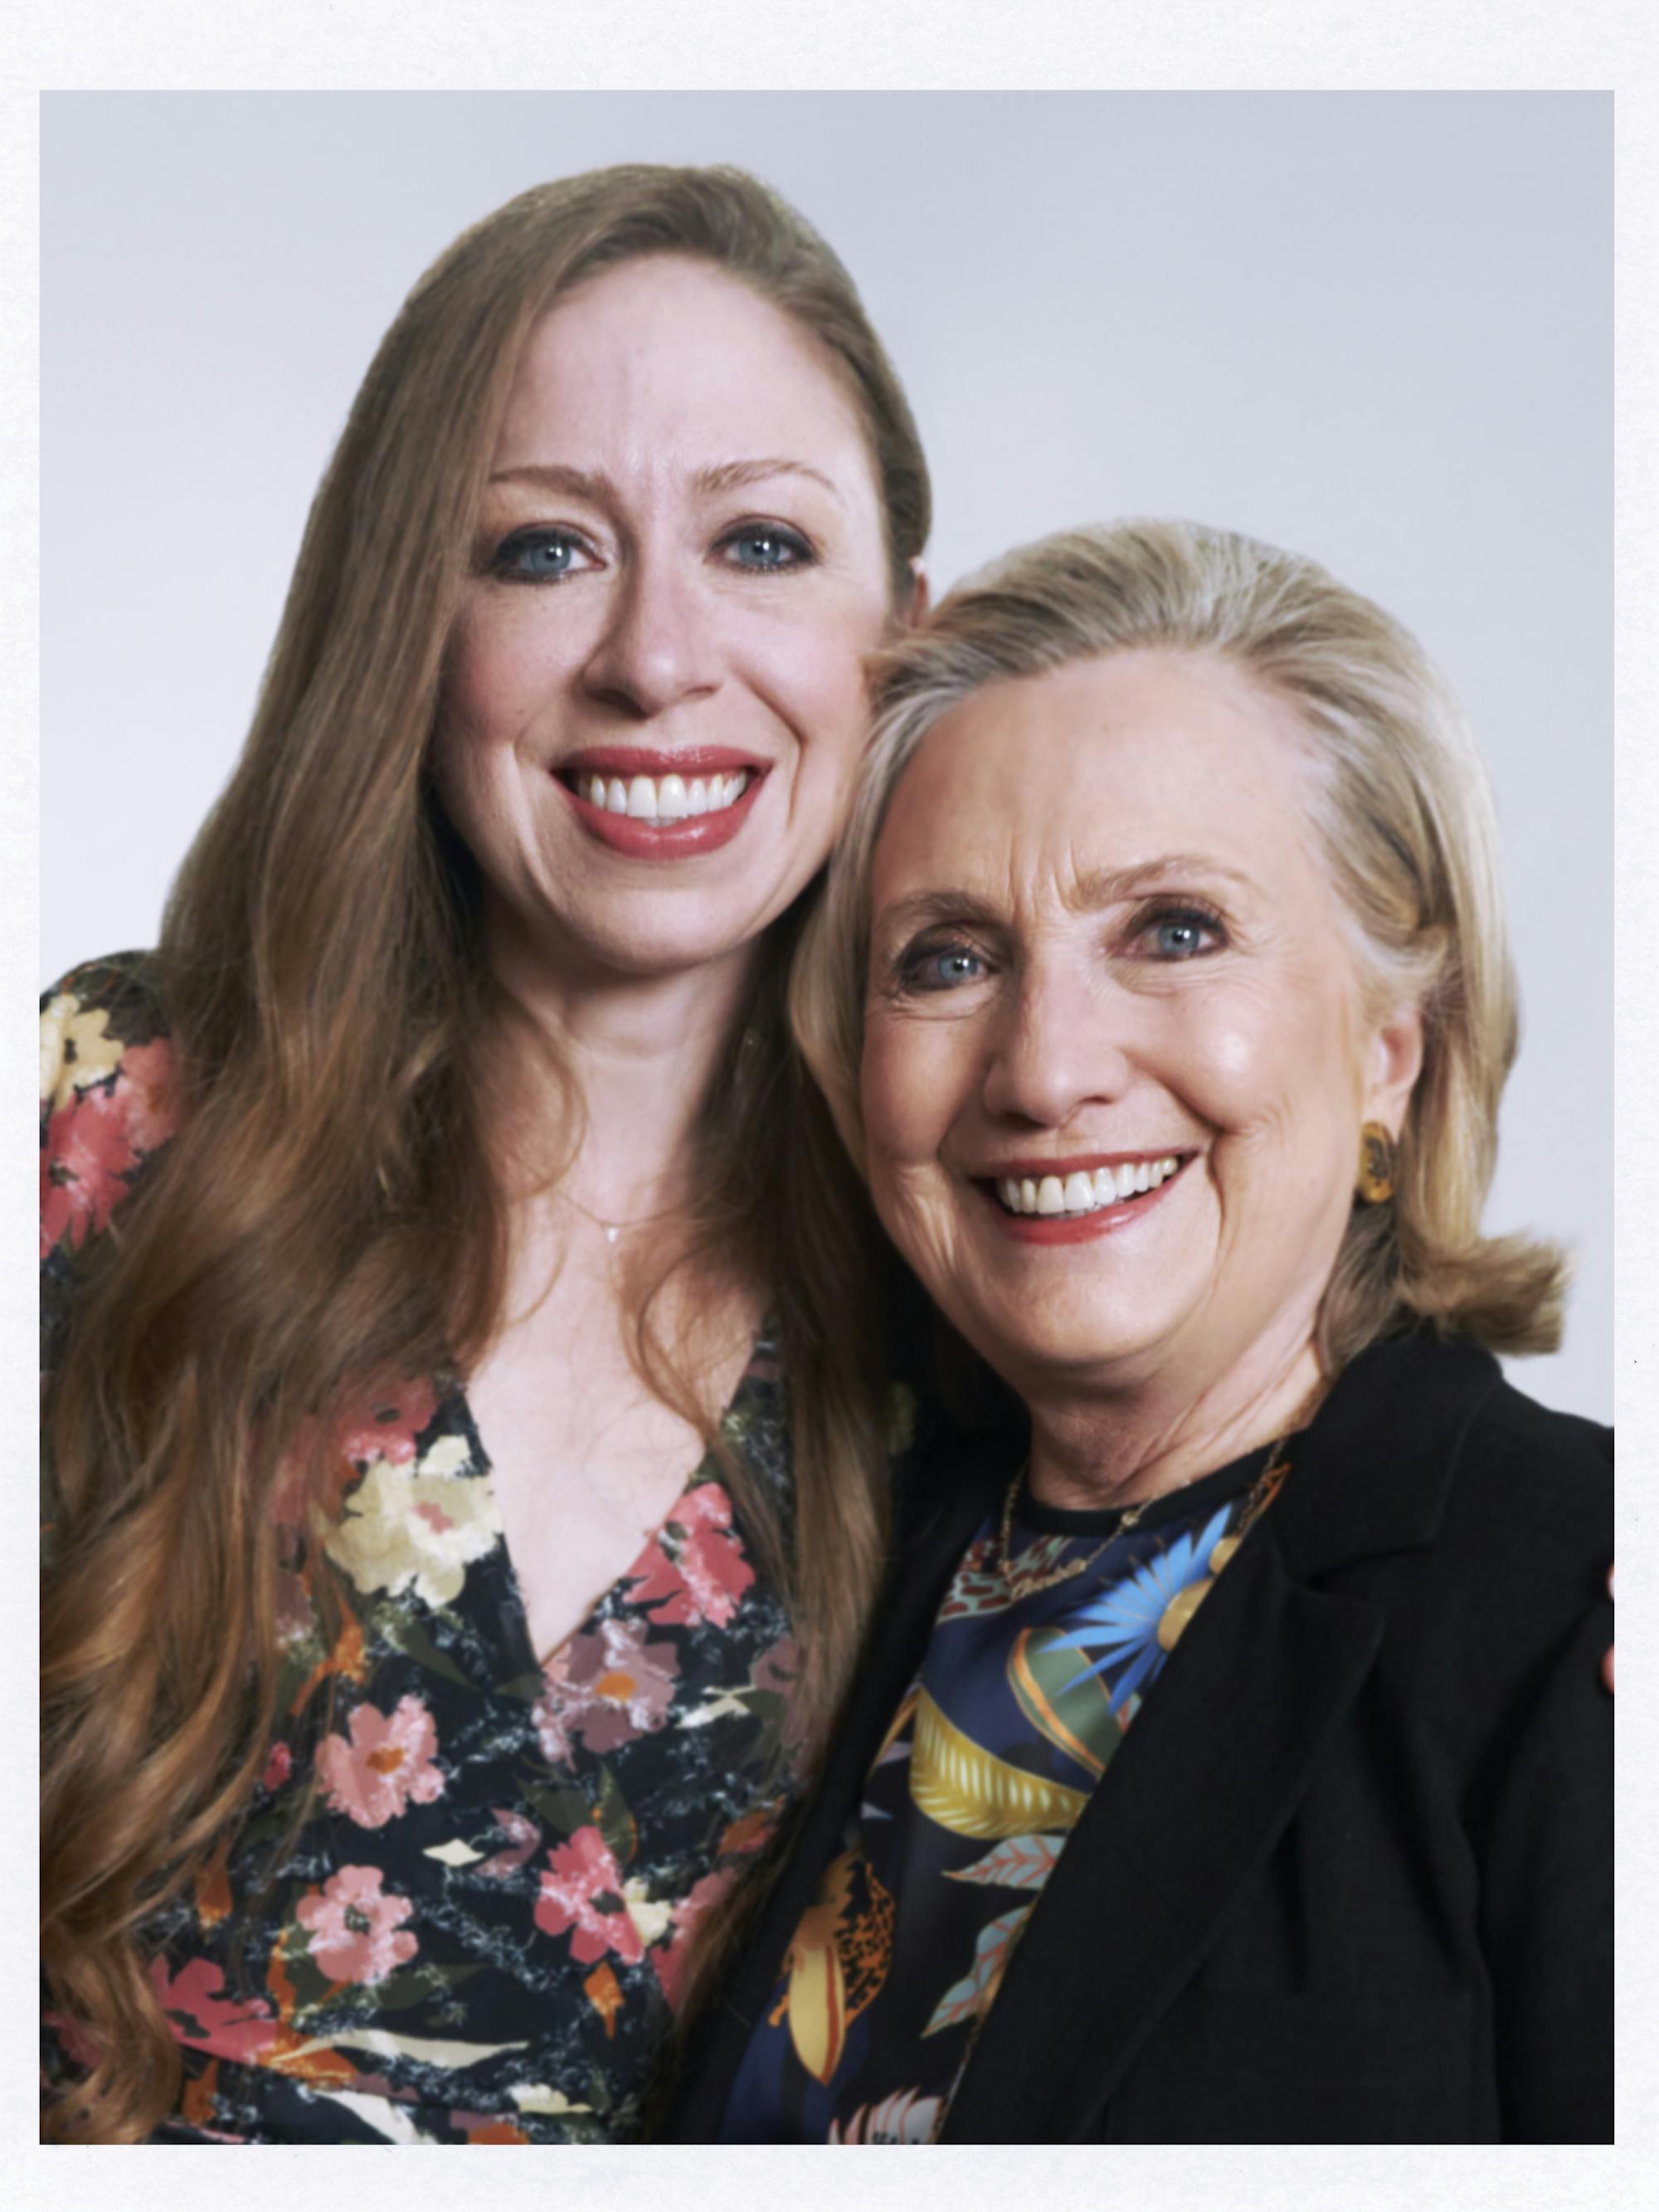 Chelsea and Hillary Clinton sit together against a white background. Chelsea wears a floral top and Hillary wears a patterned shirt underneath a black blazer.